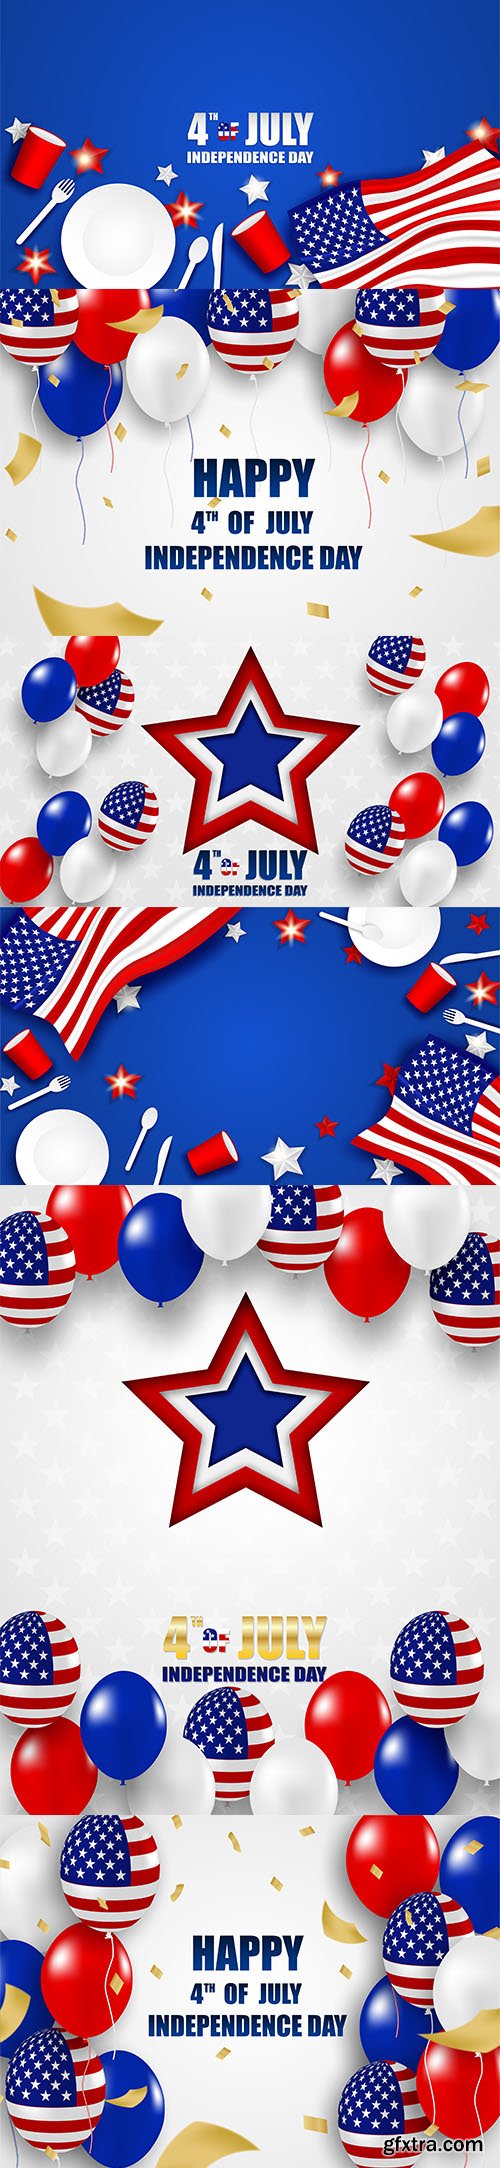 Vector Set of 4th July Happy Independence Day USA Backgrounds